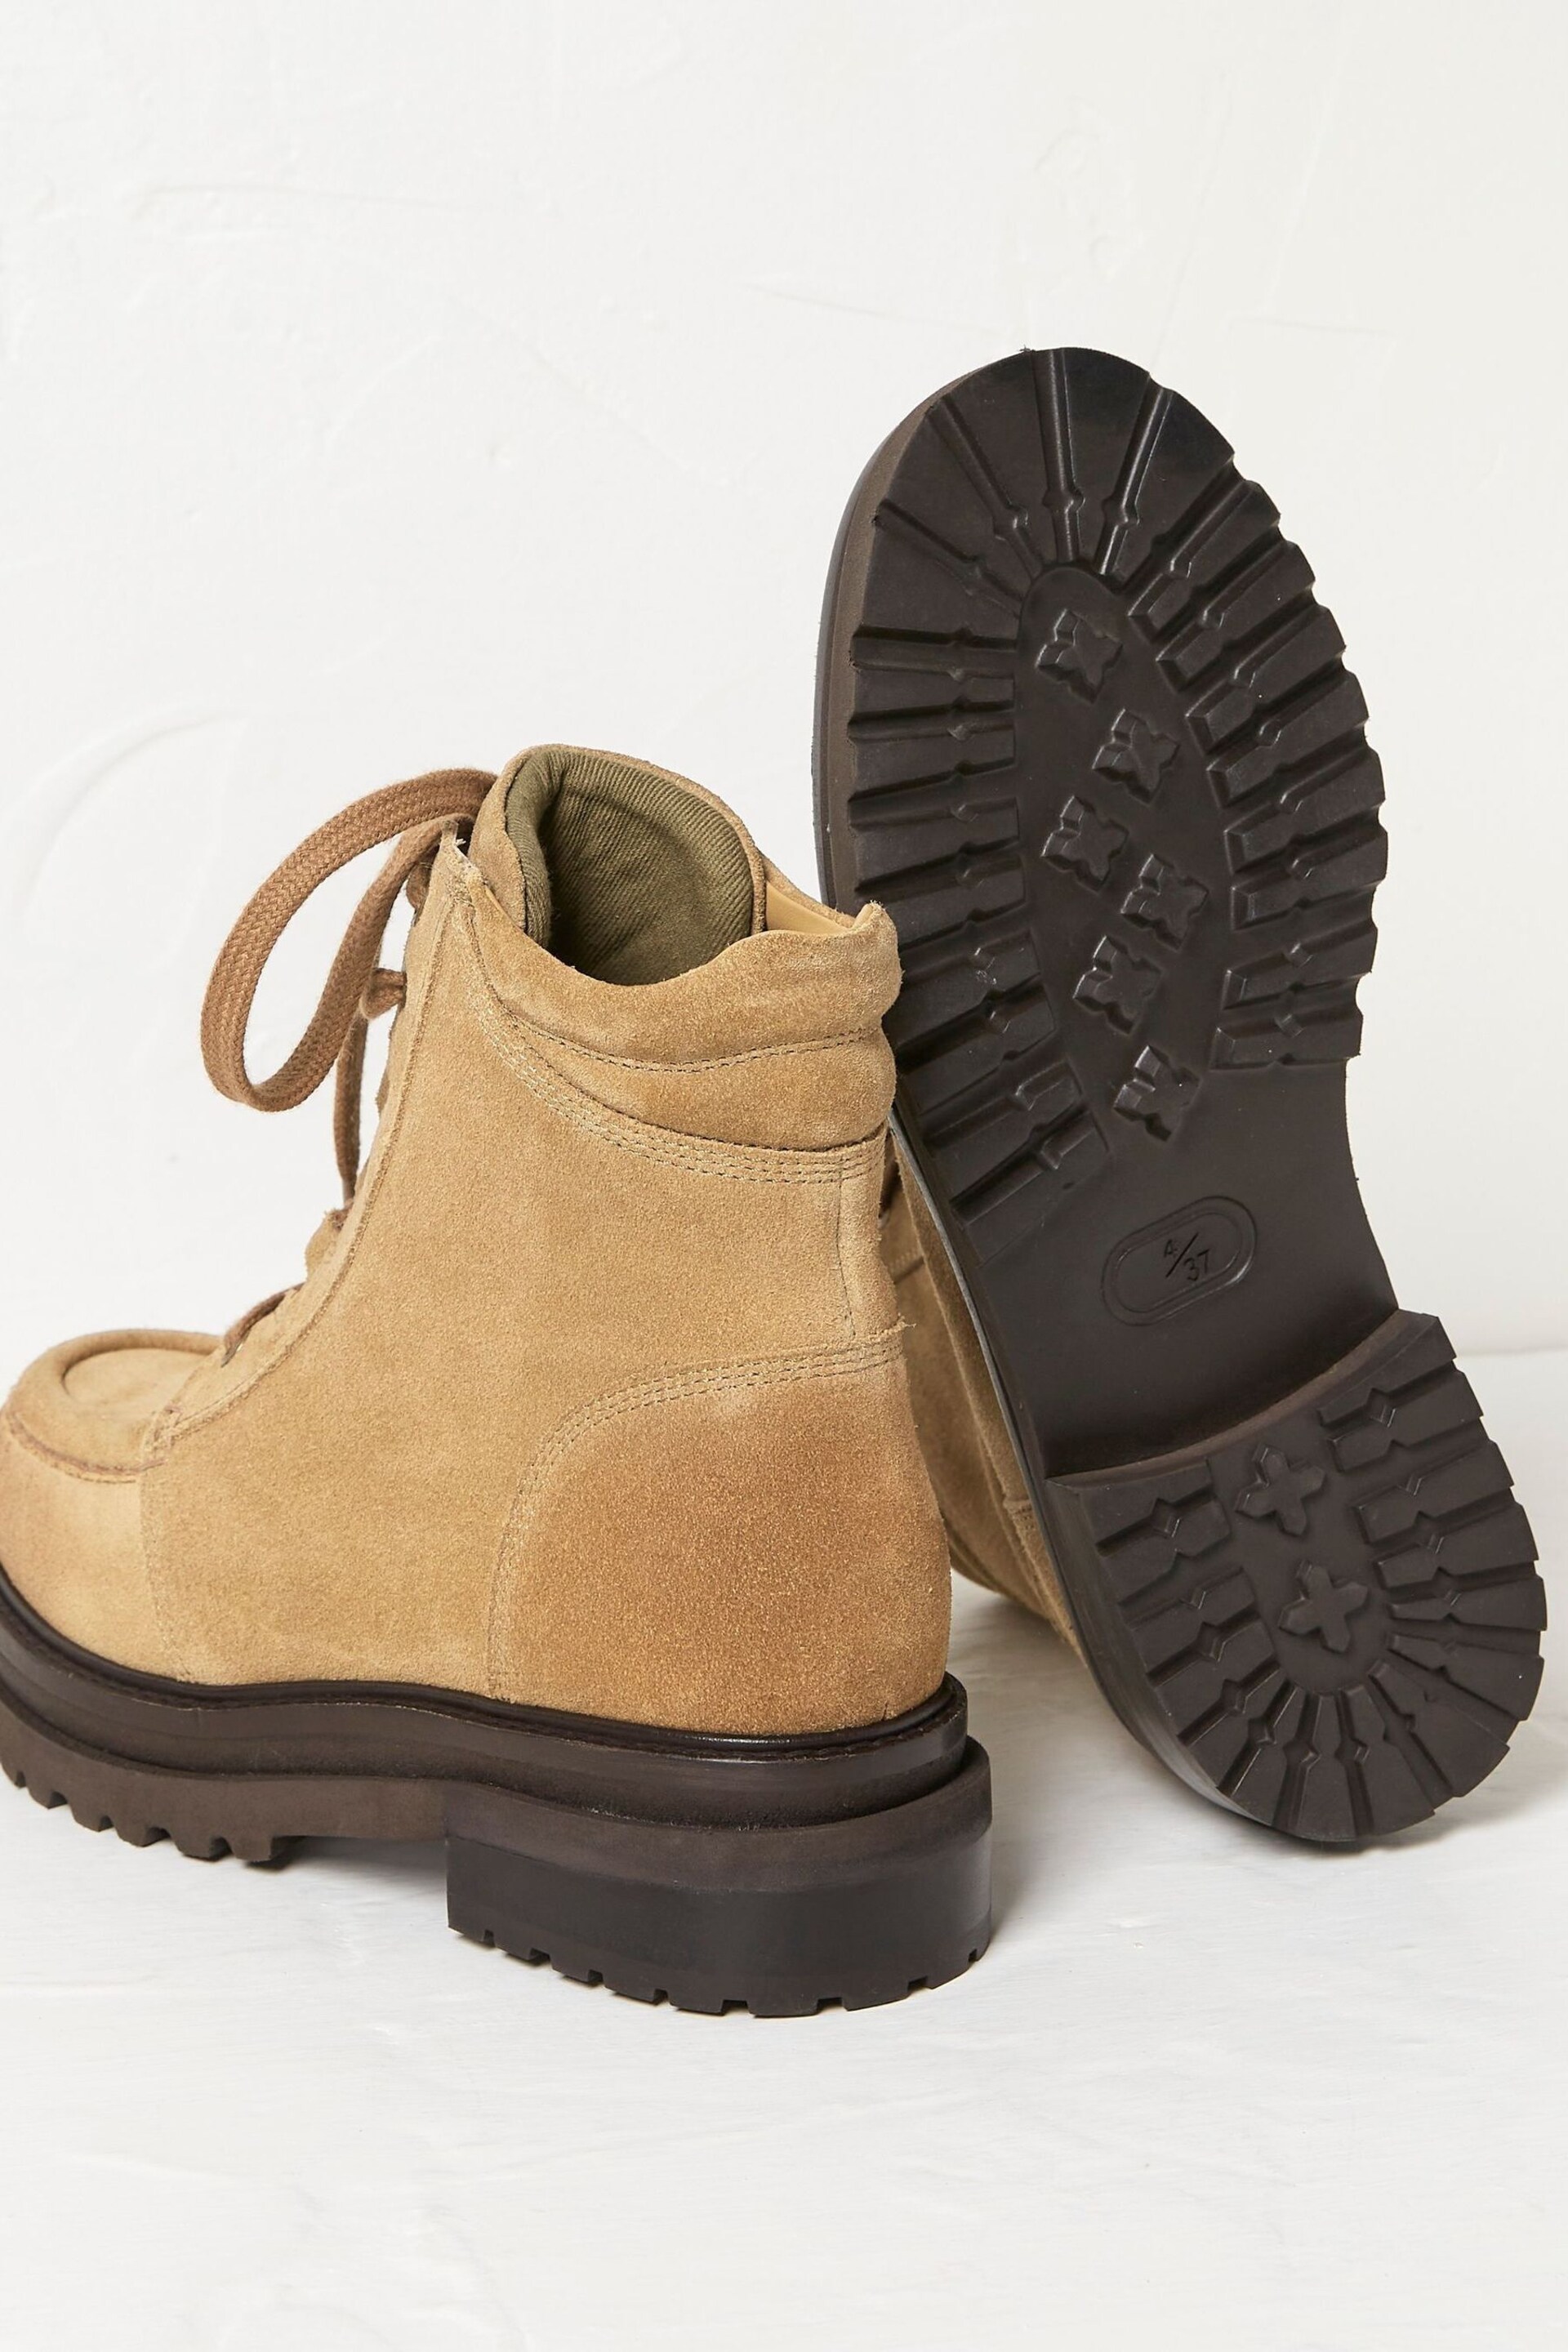 FatFace Brown Suede Apron Ankle Boots - Image 3 of 4